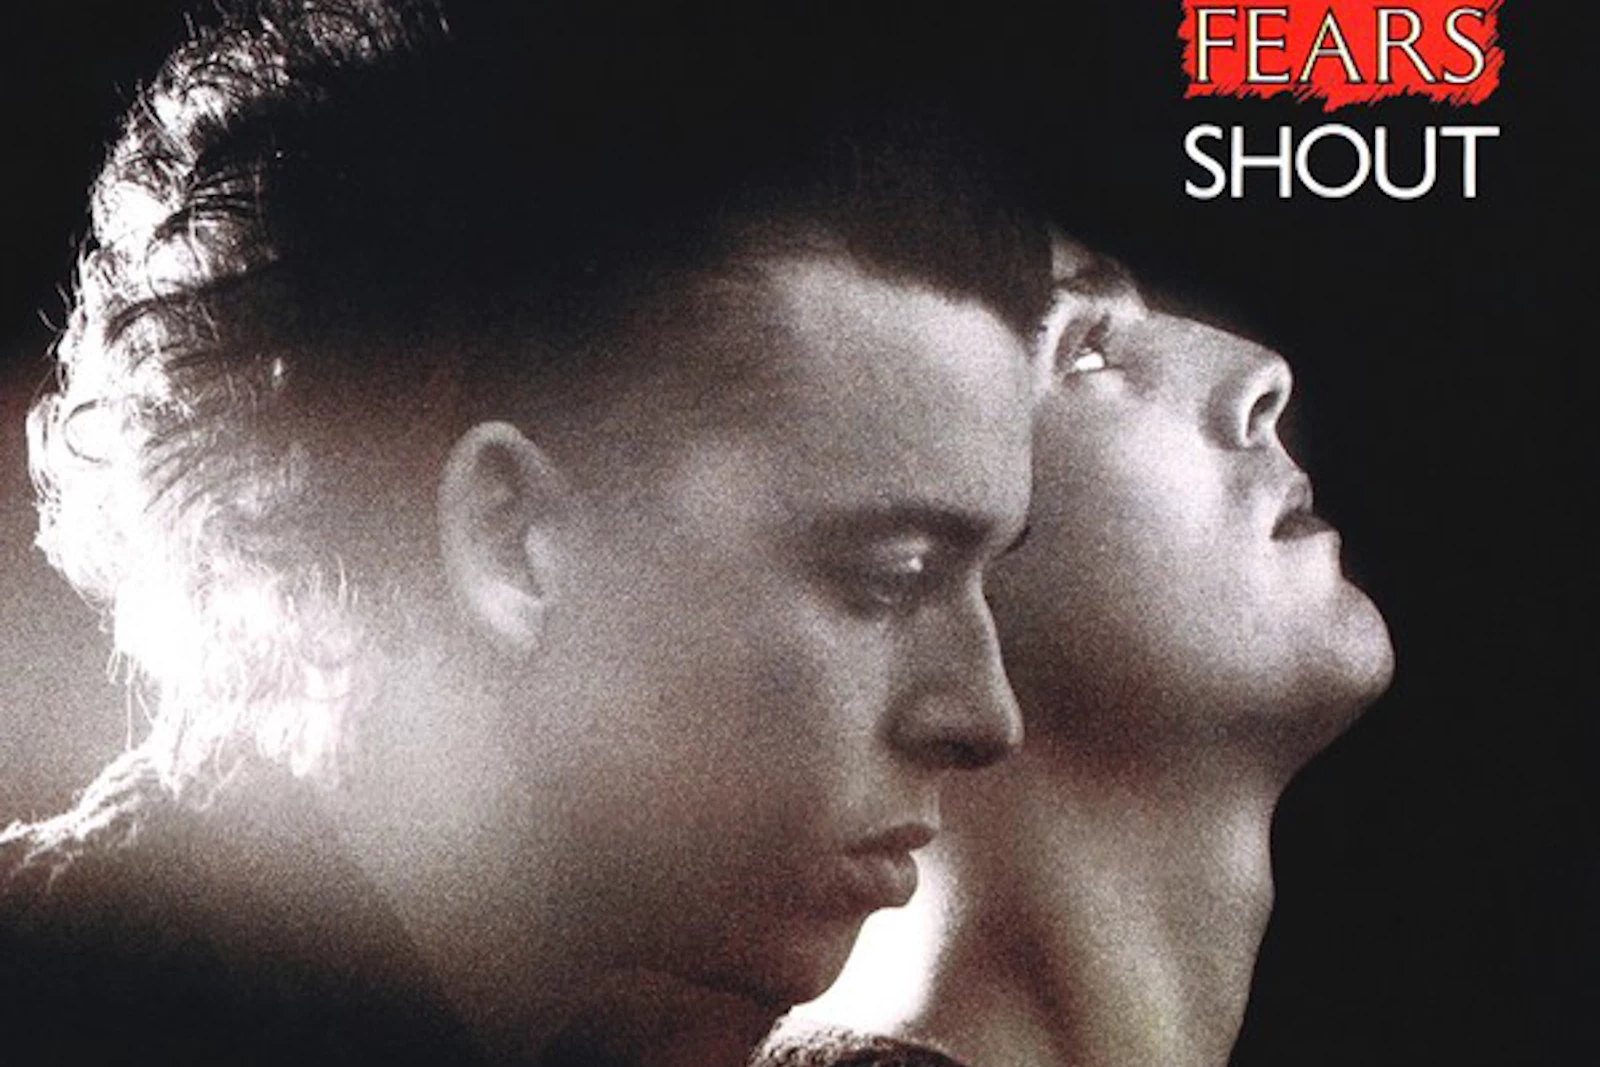 Tears for Fears: The Tipping Point review – an elegant, long-awaited return, Pop and rock